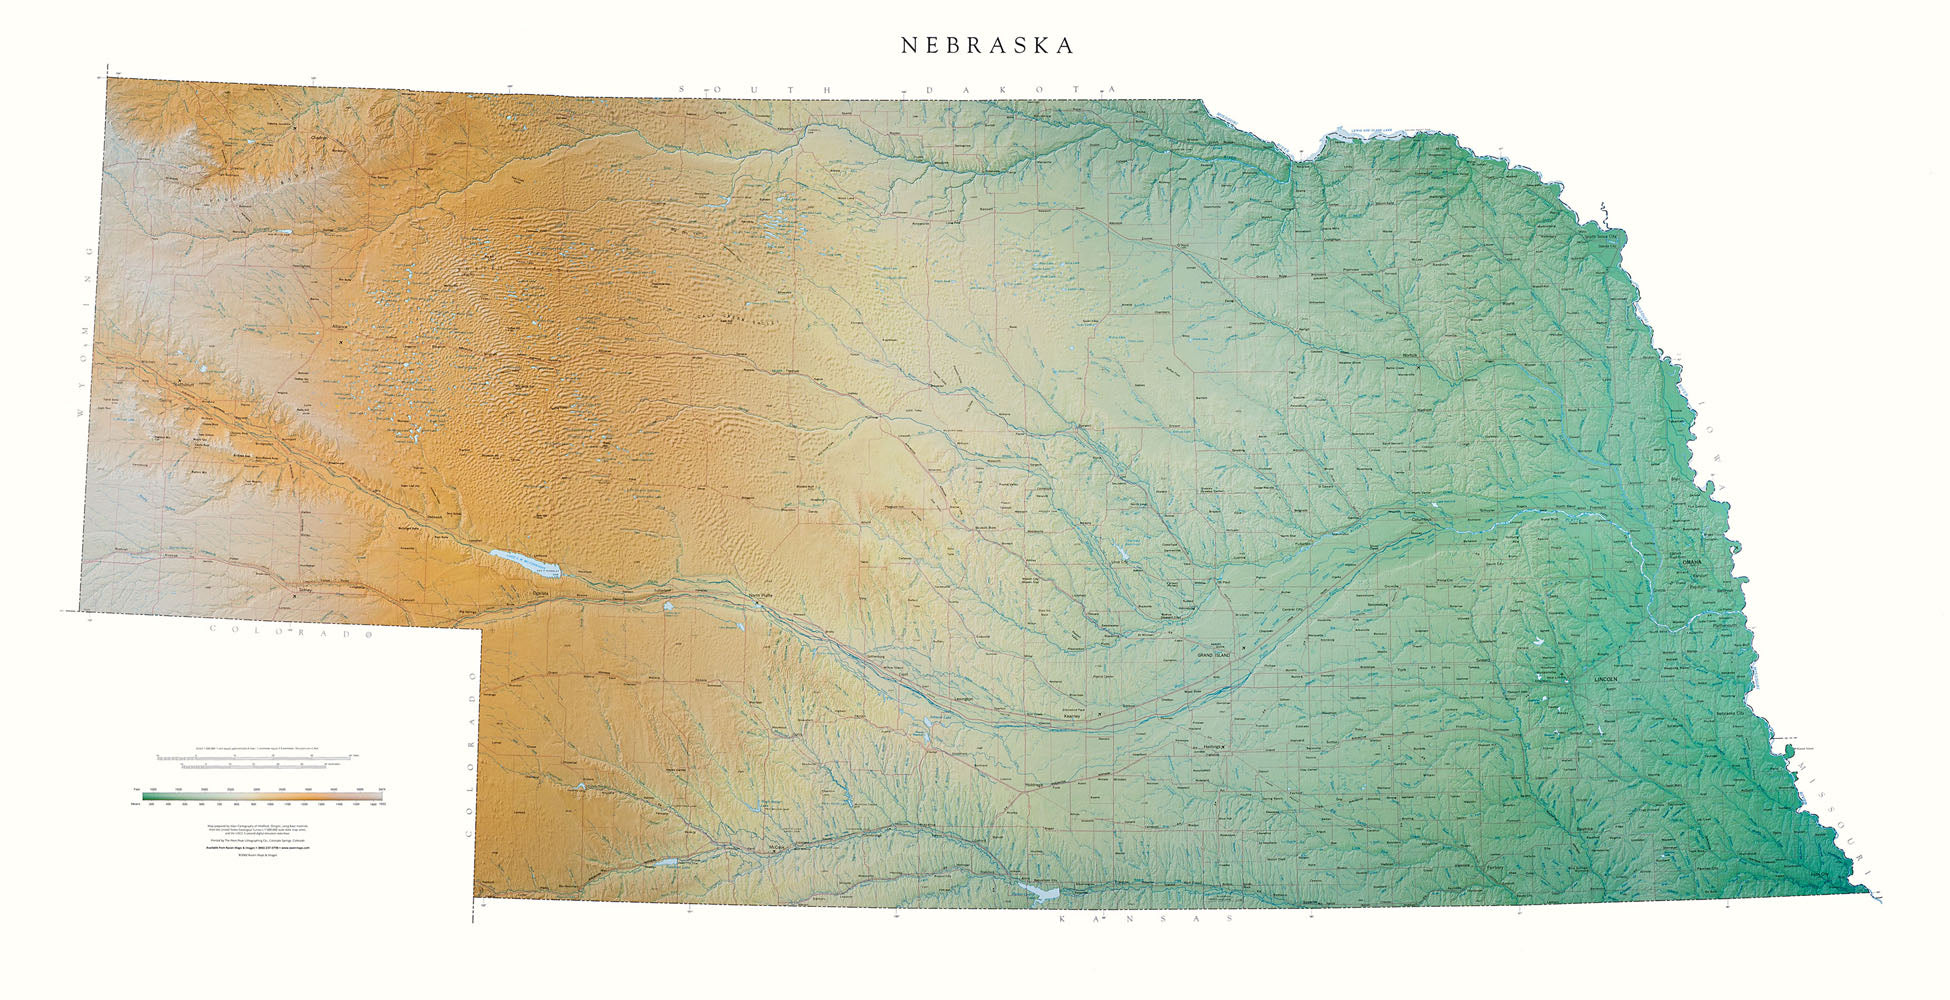 Nebraska Topographical Wall Map By Raven Maps, 33" X 64"